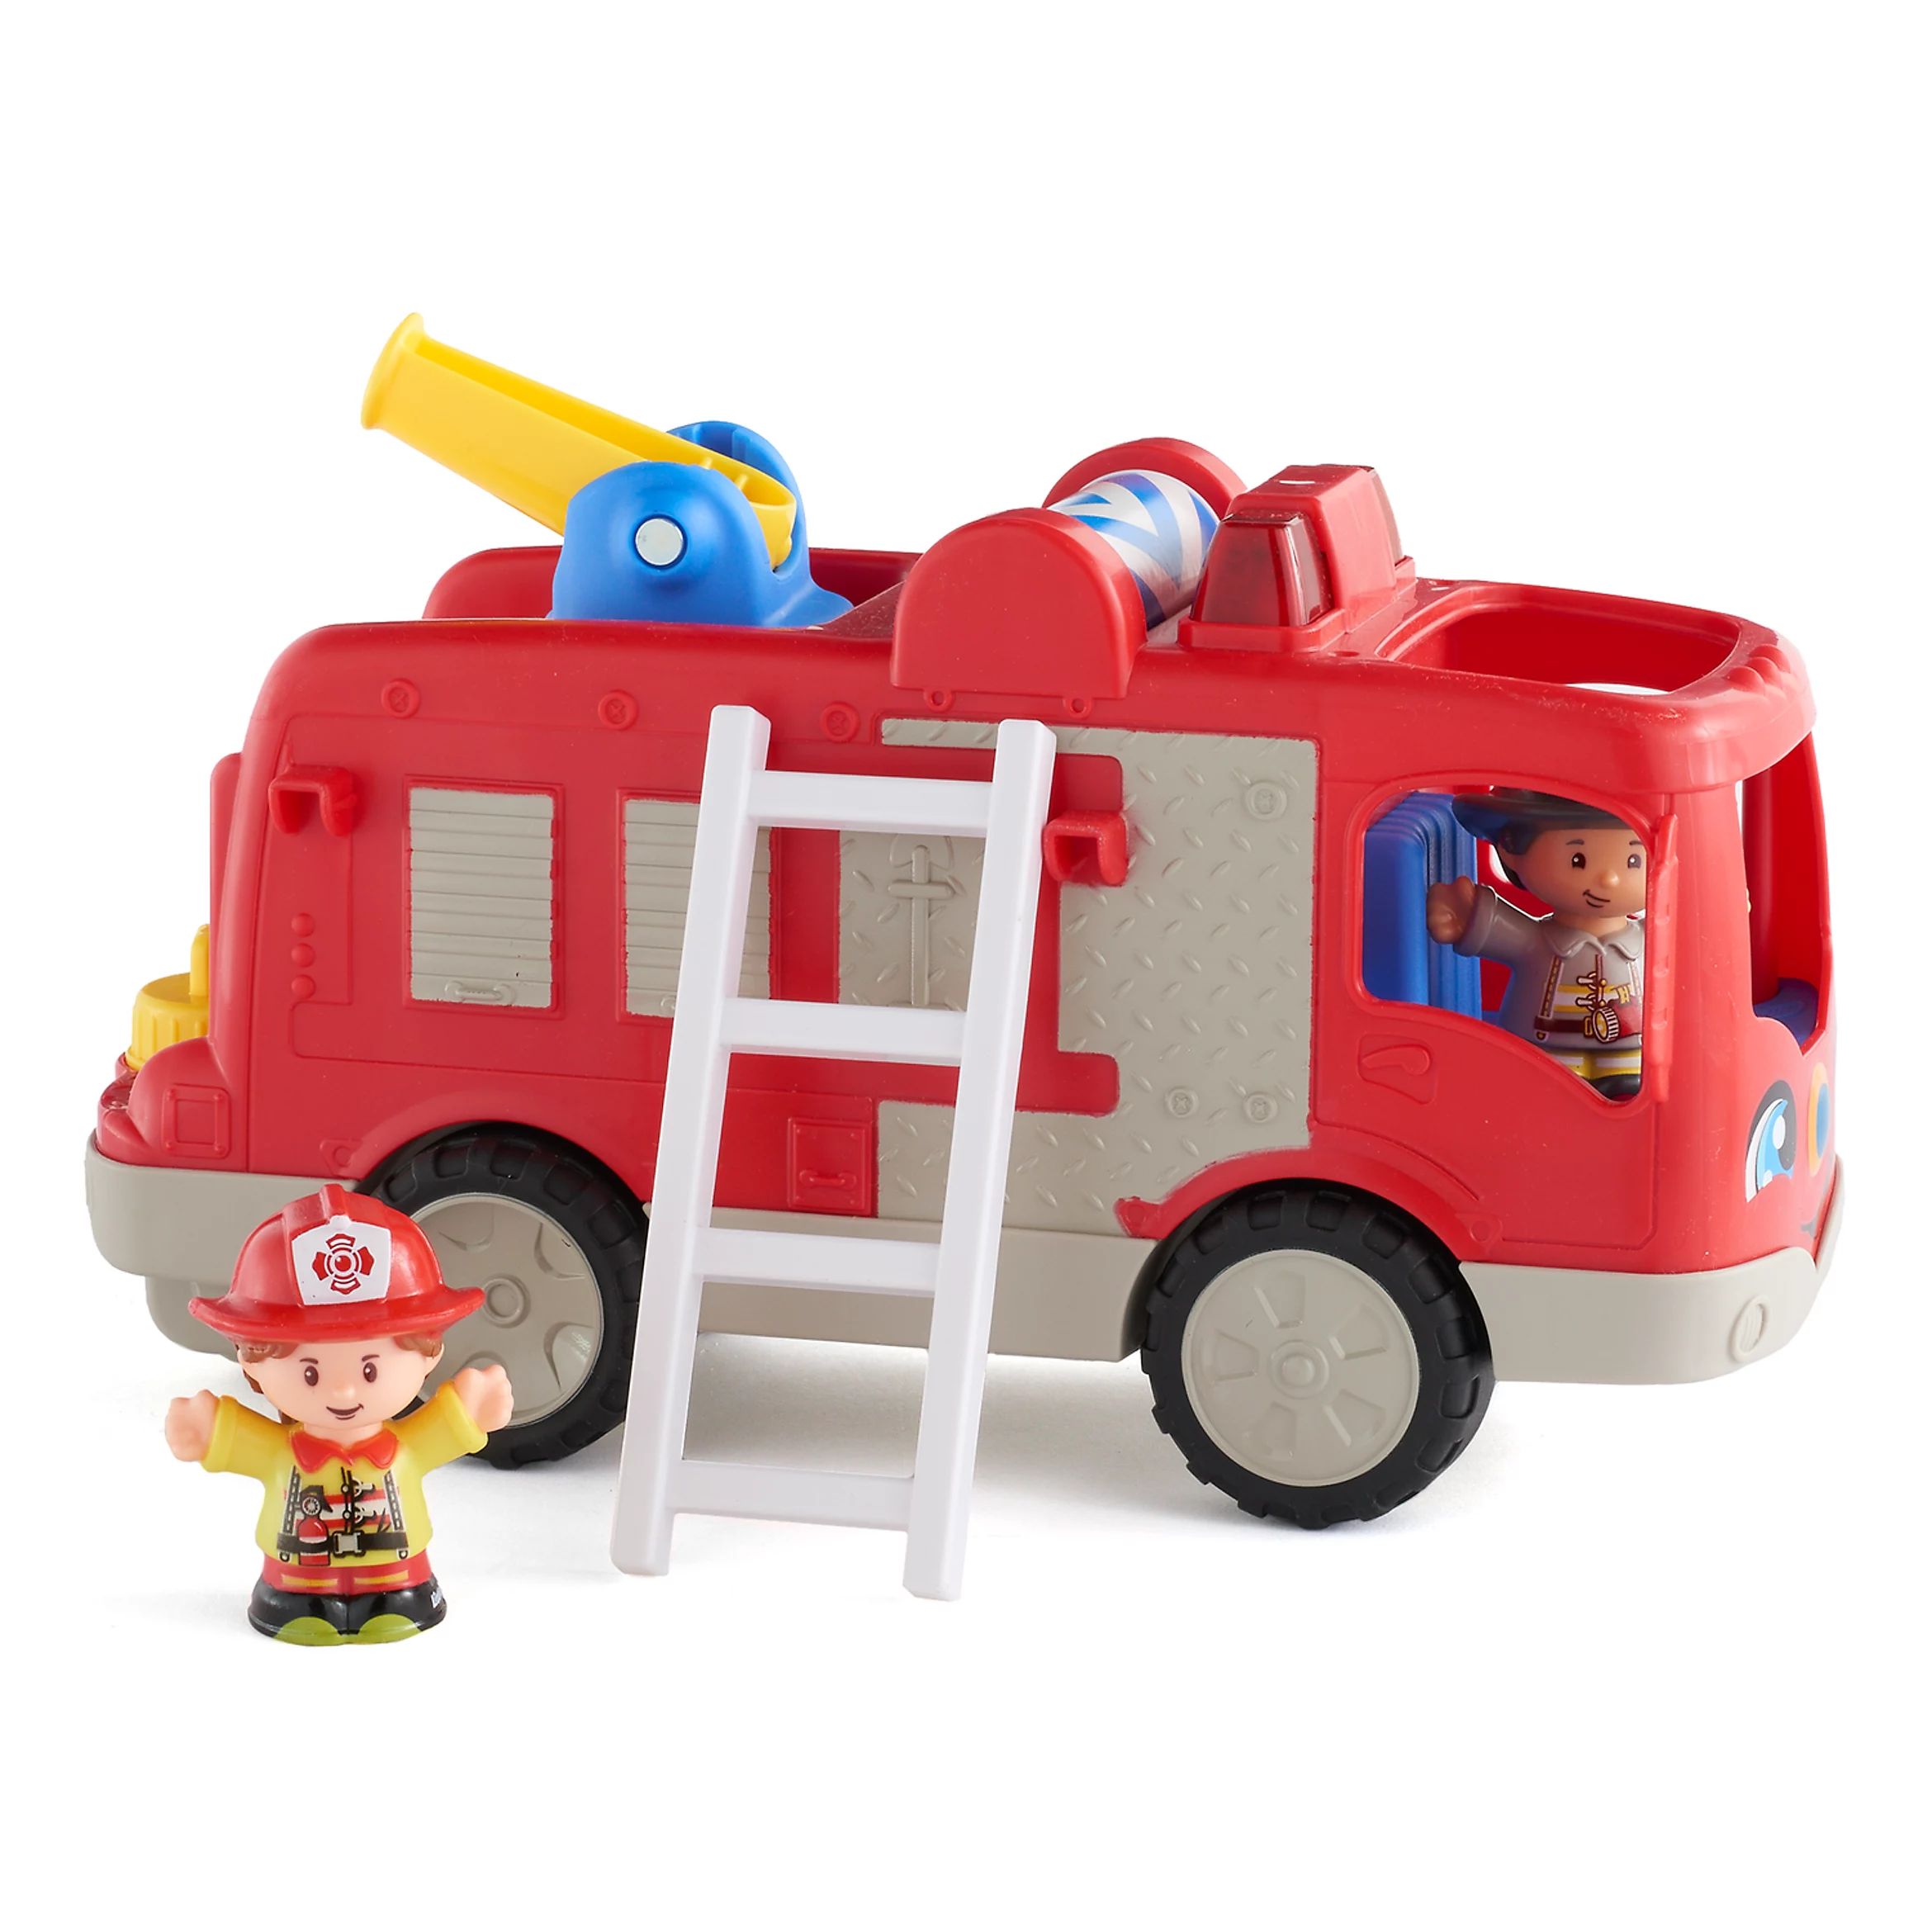 Fisher-Price Little People Helping Others Fire Truck | Kohl's